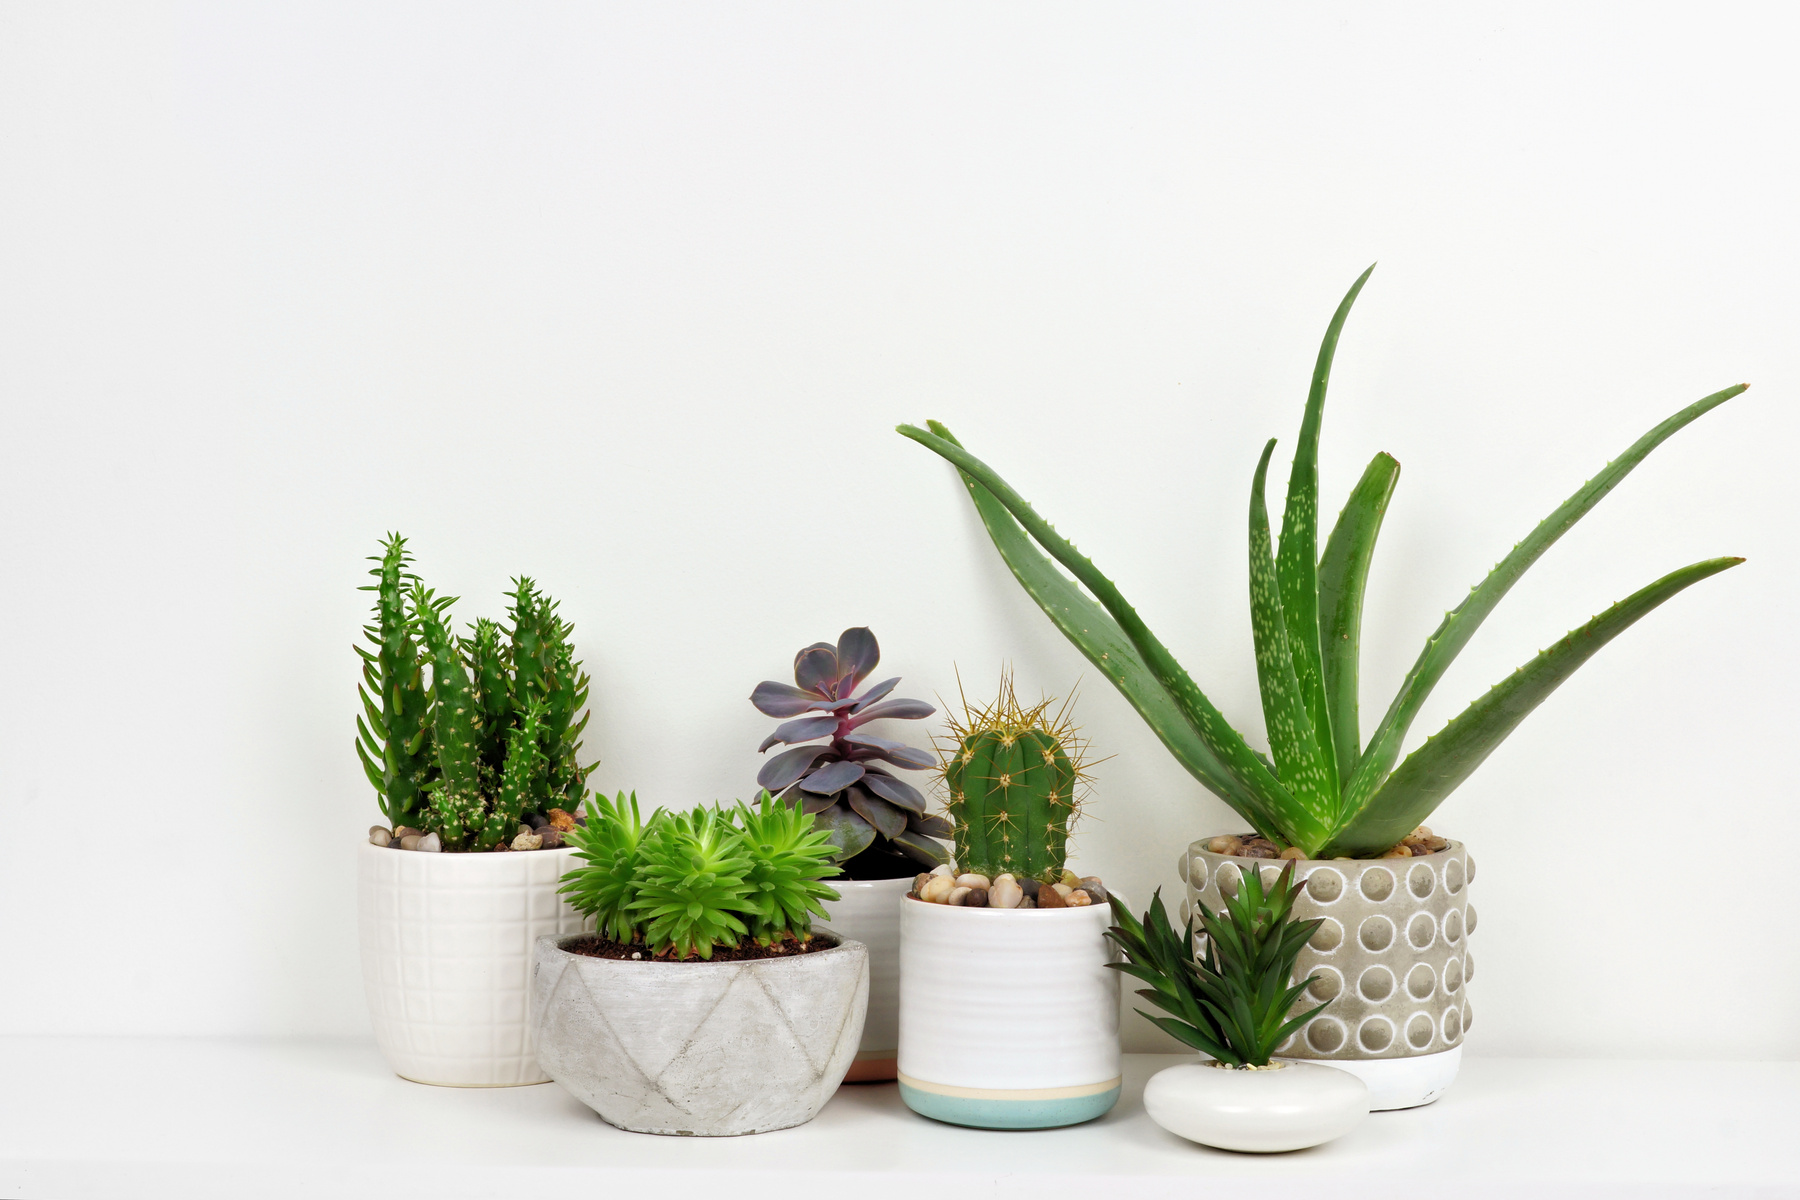 Various cacti and succulents in pots on shelf against white wall